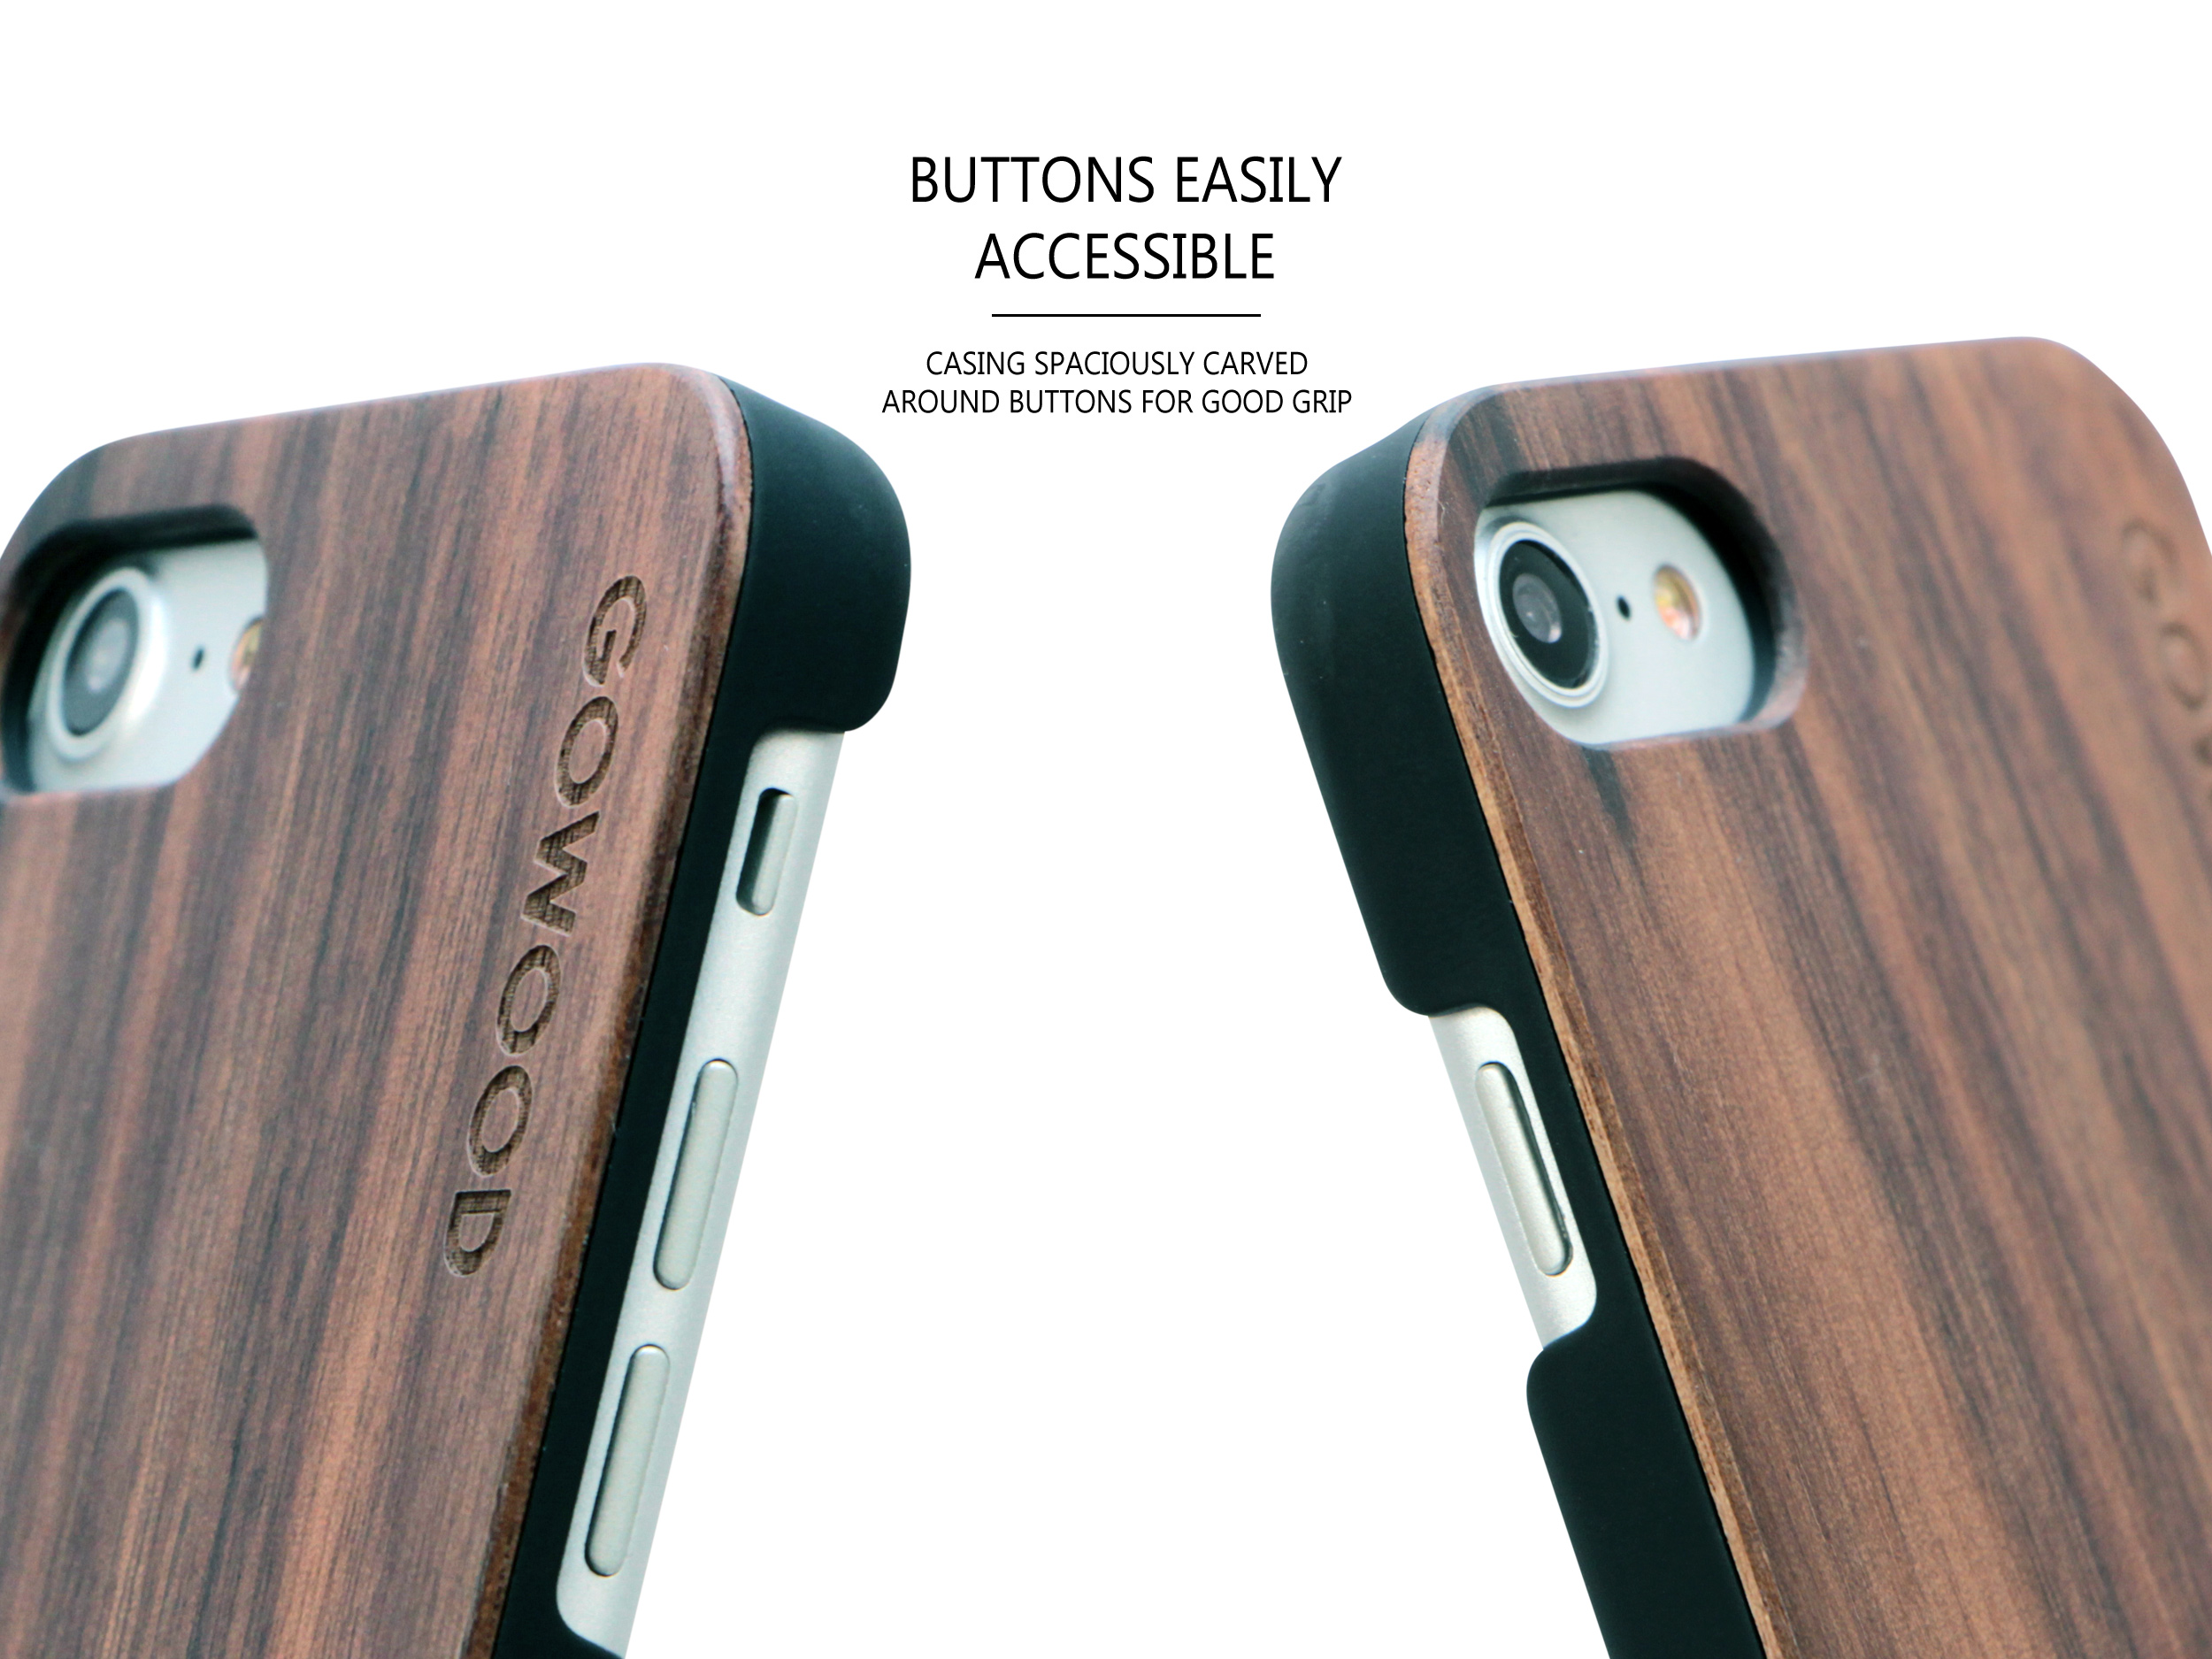 iPhone 7 hoesje walnoot hout buttons